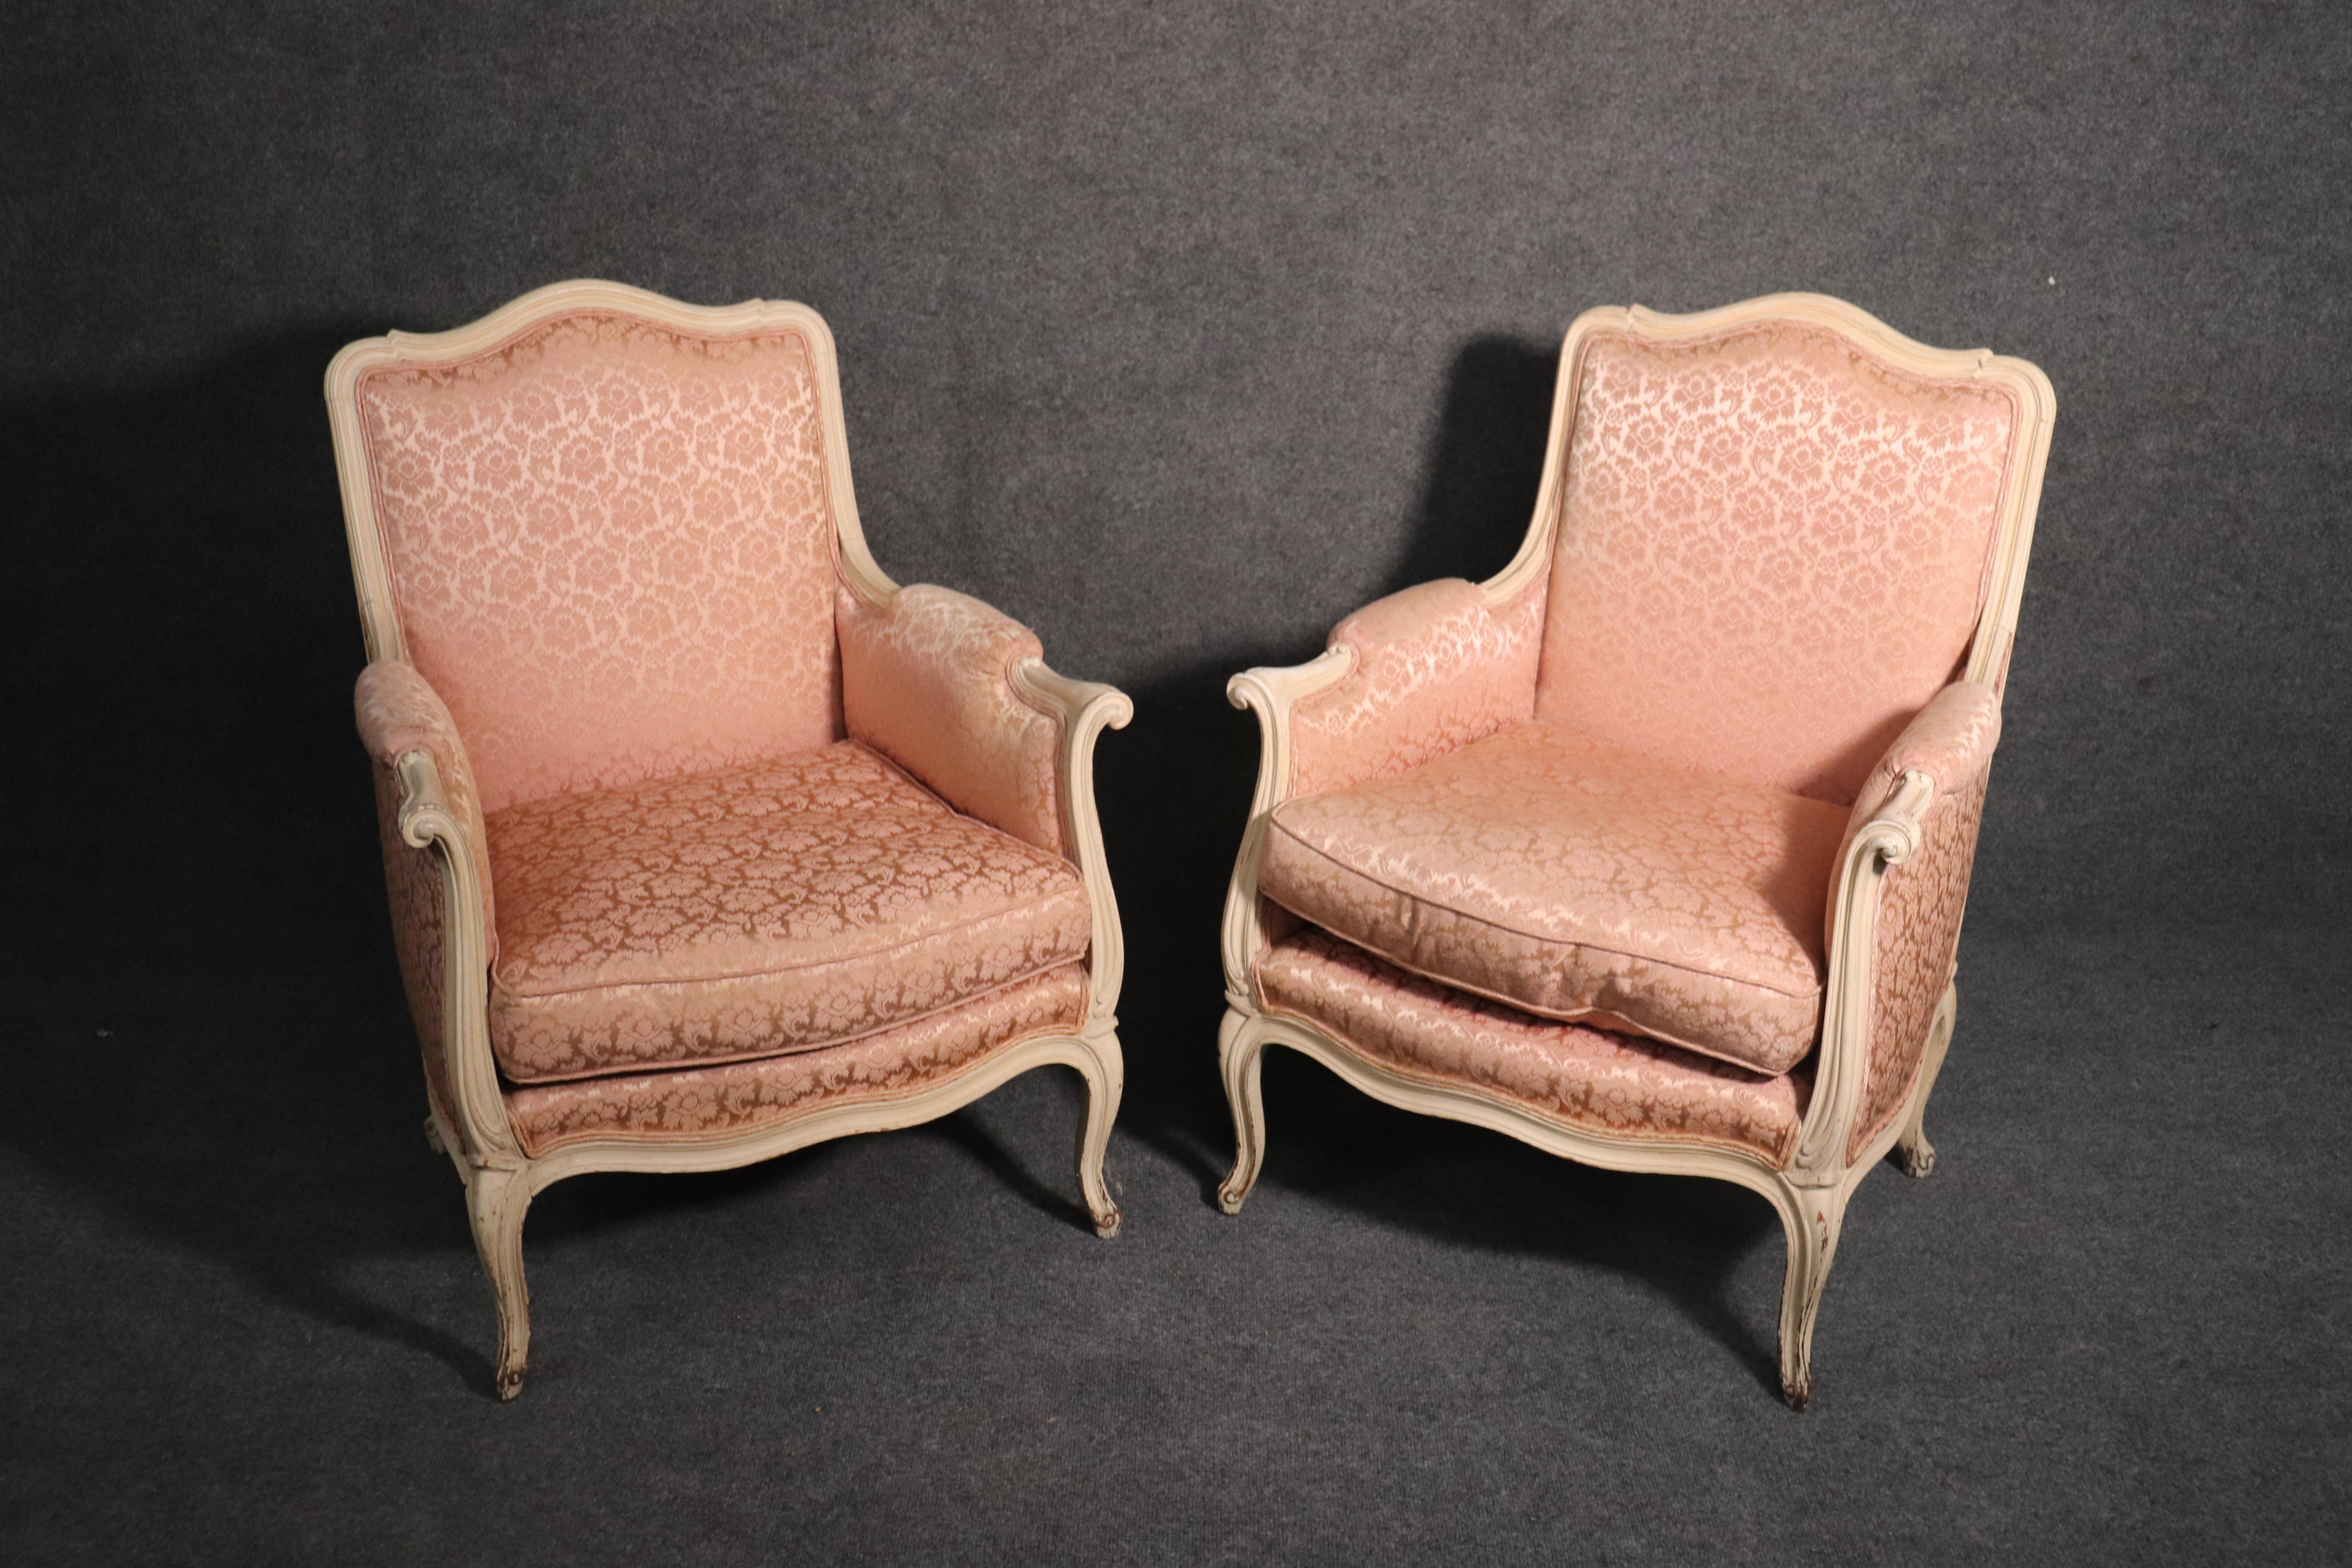 This is a beautiful pair of French Louis XV style crème painted chairs in beautiful pink damask upholstery. The fabric is in good condition with no major issues or problems to mention. The frames are in good condition as well. They measure 36 tall x